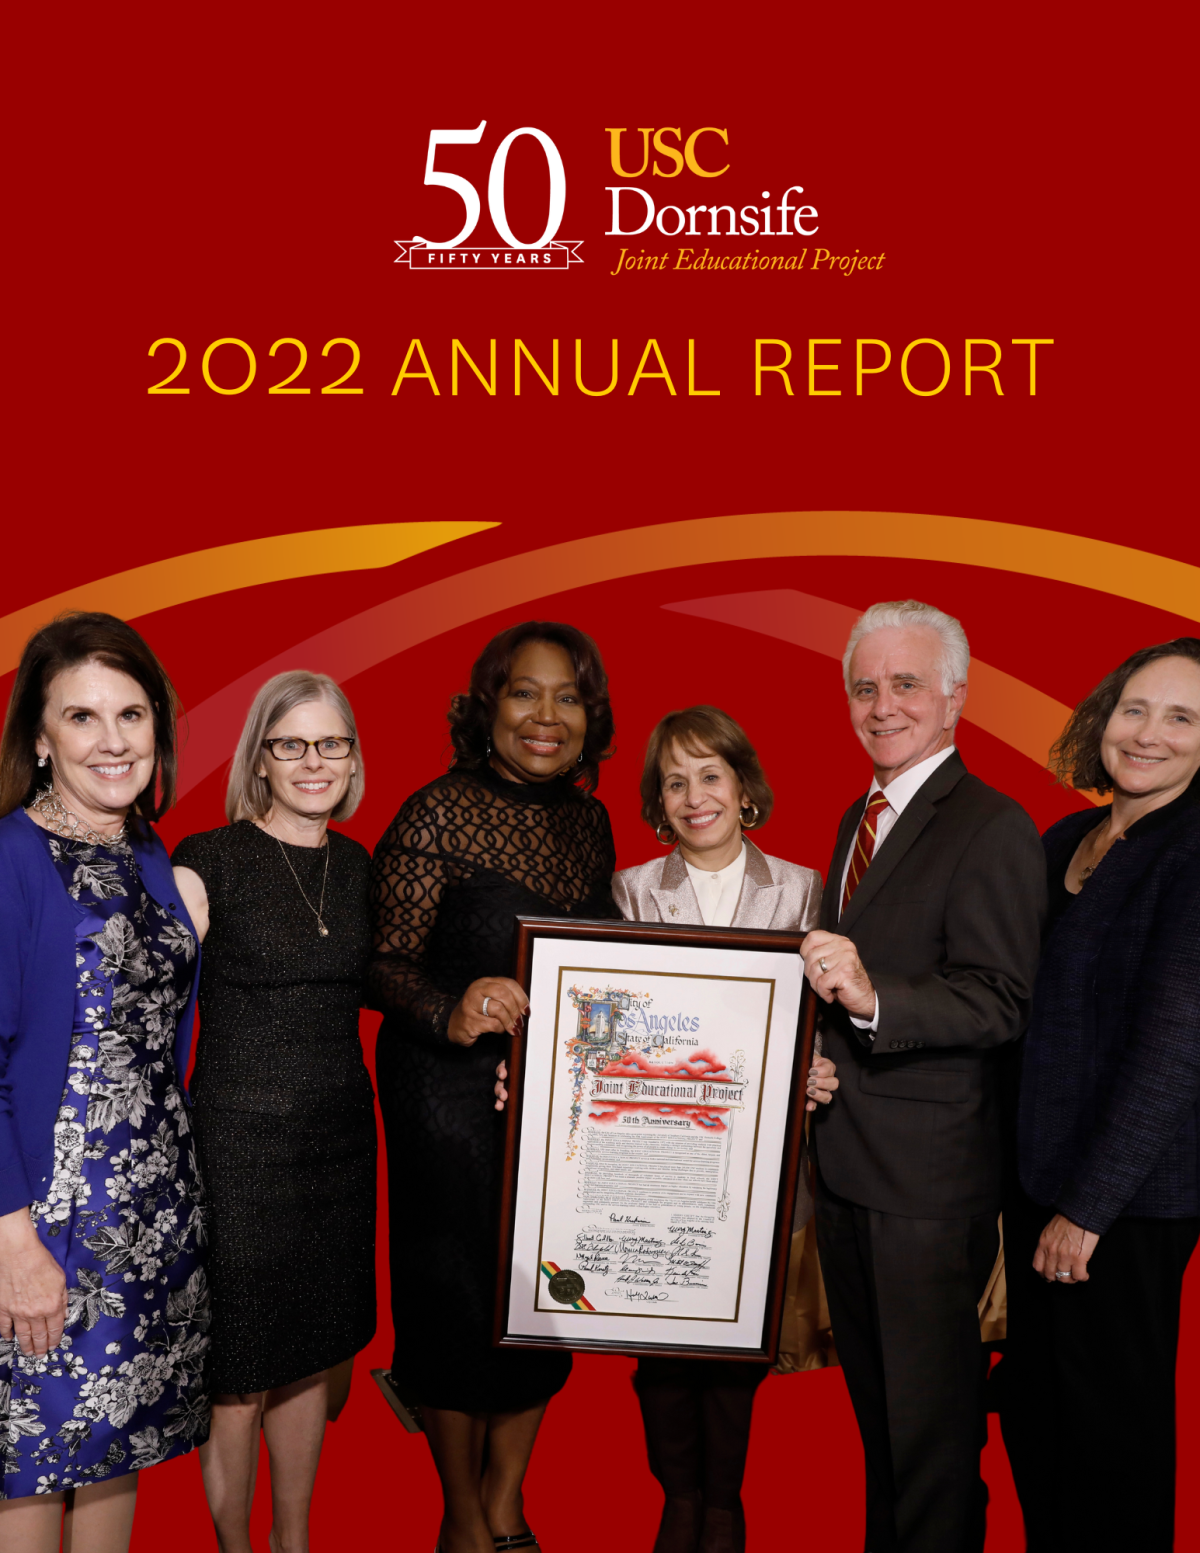 2022 Annual Report Cover including people posing